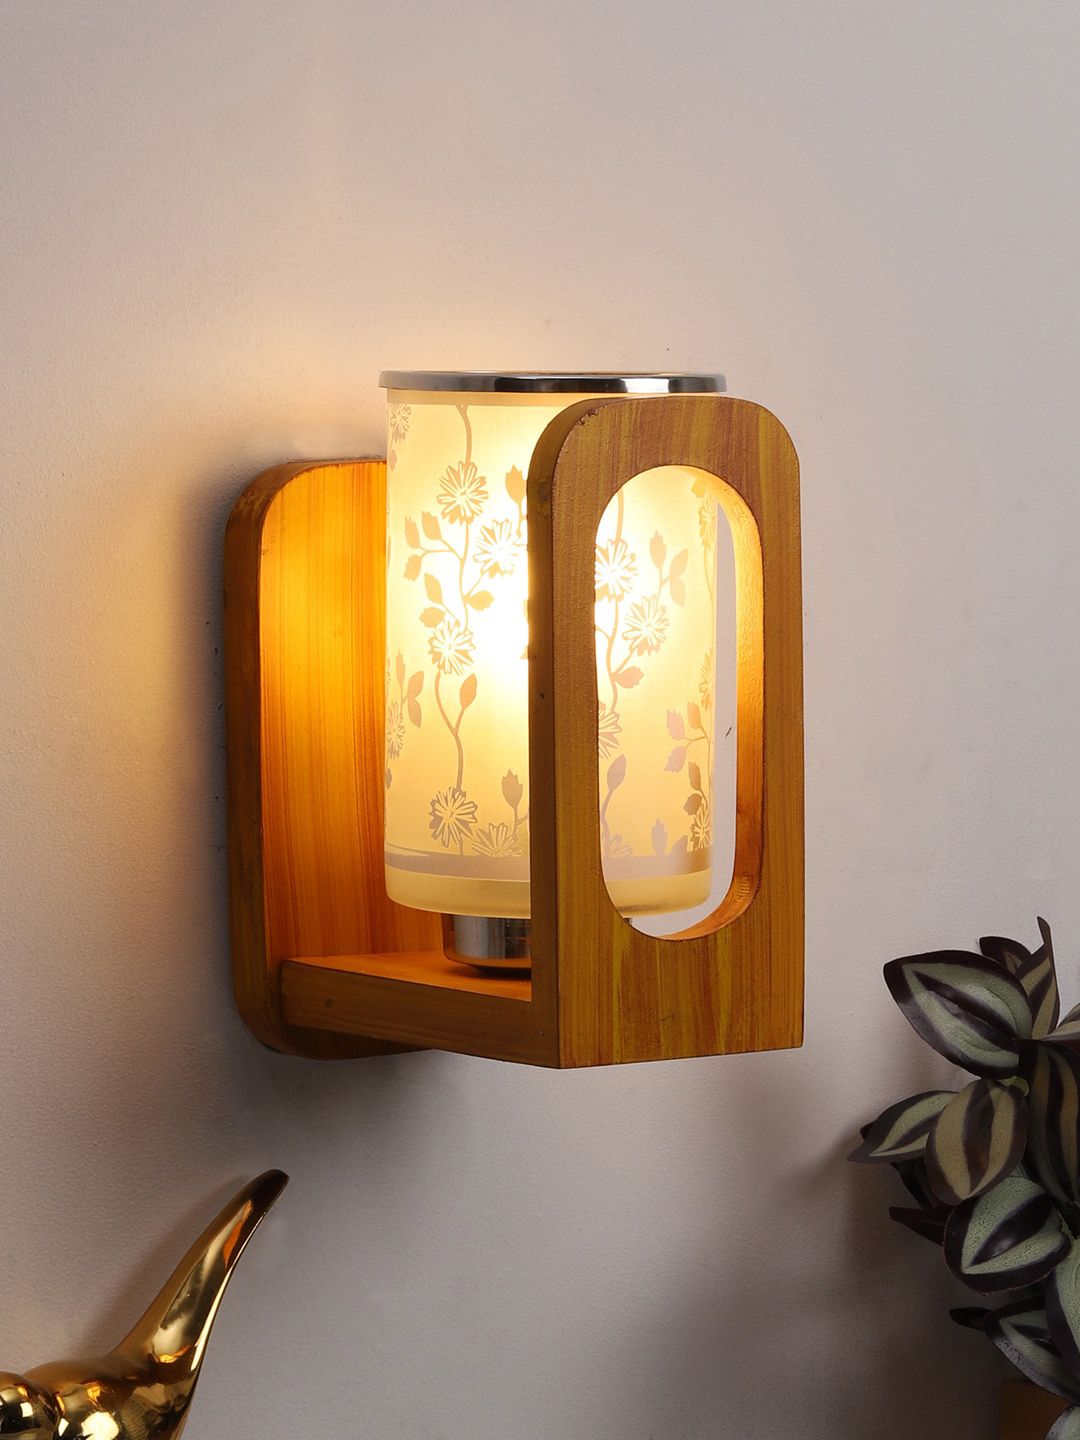 Foziq Brown & White Printed Contemporary Cylindrical Wall Lamp Price in India